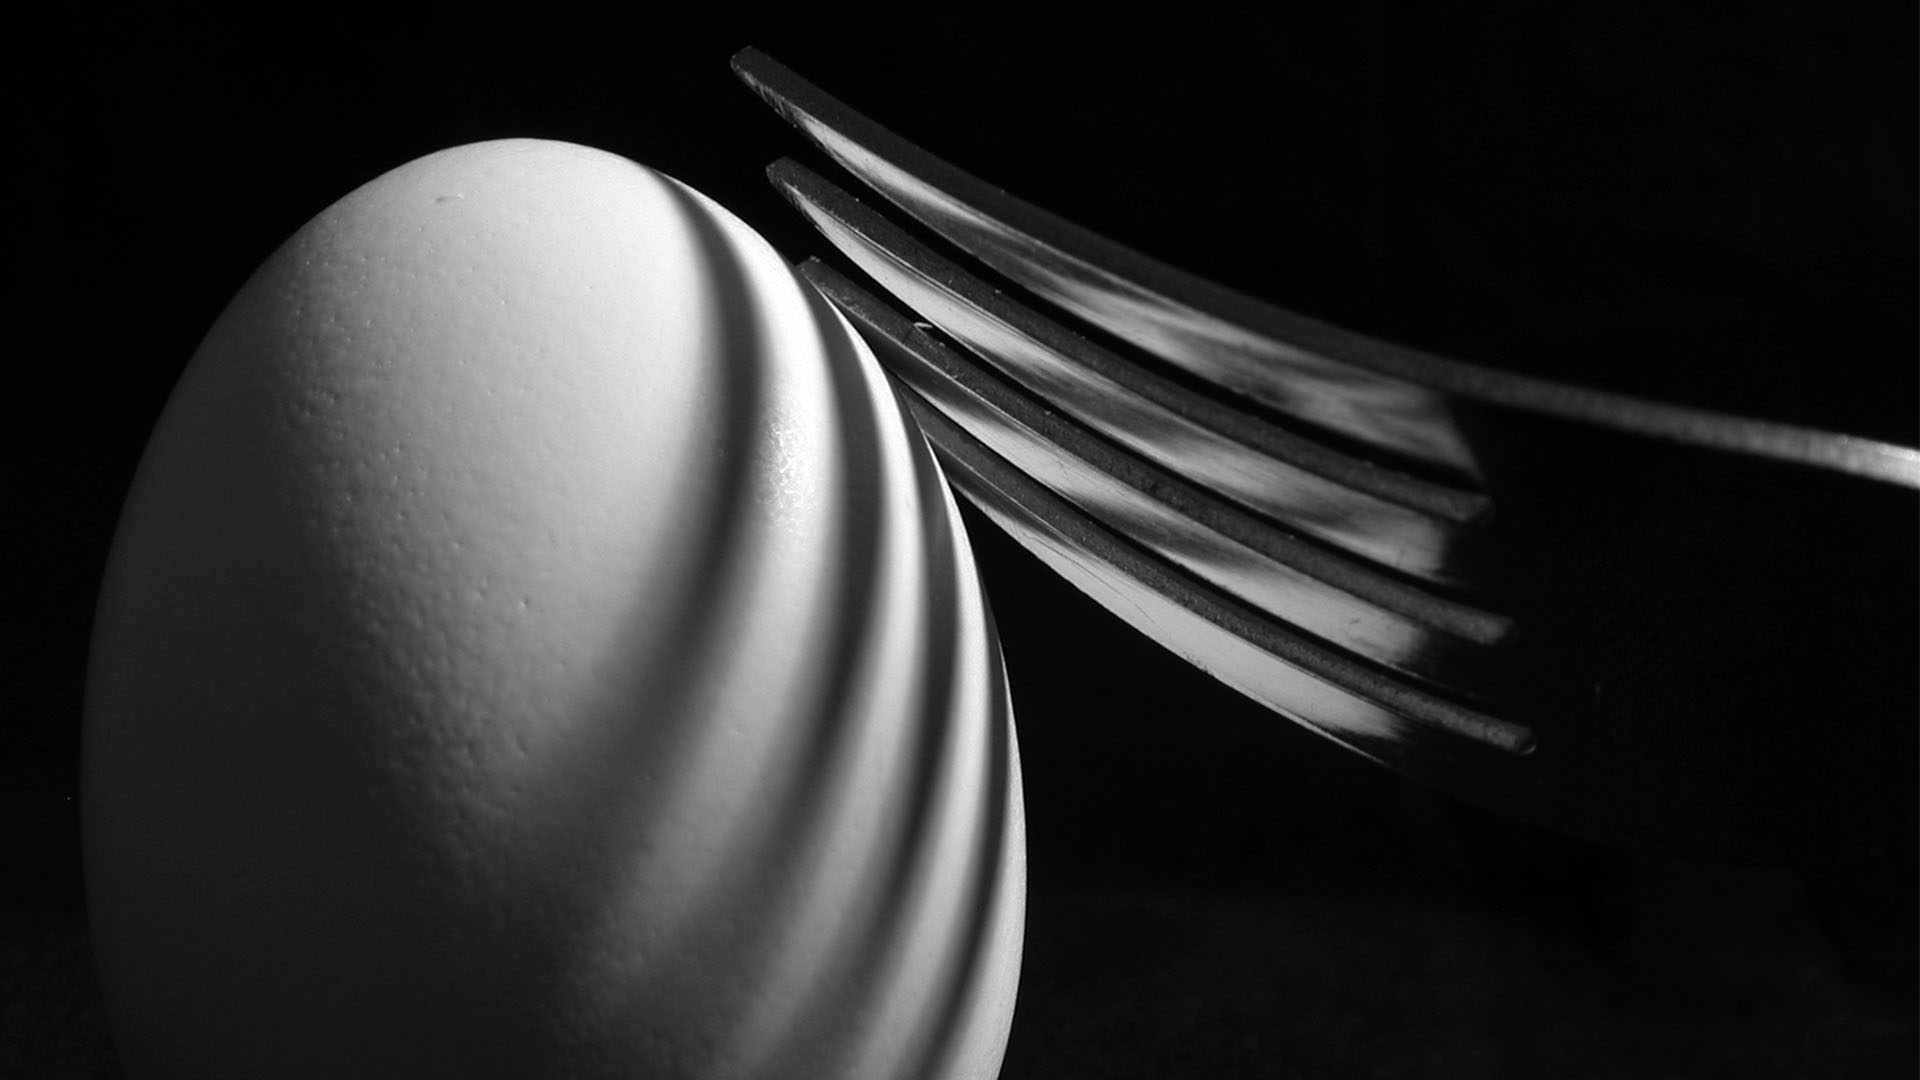 align egg and fork in black and white